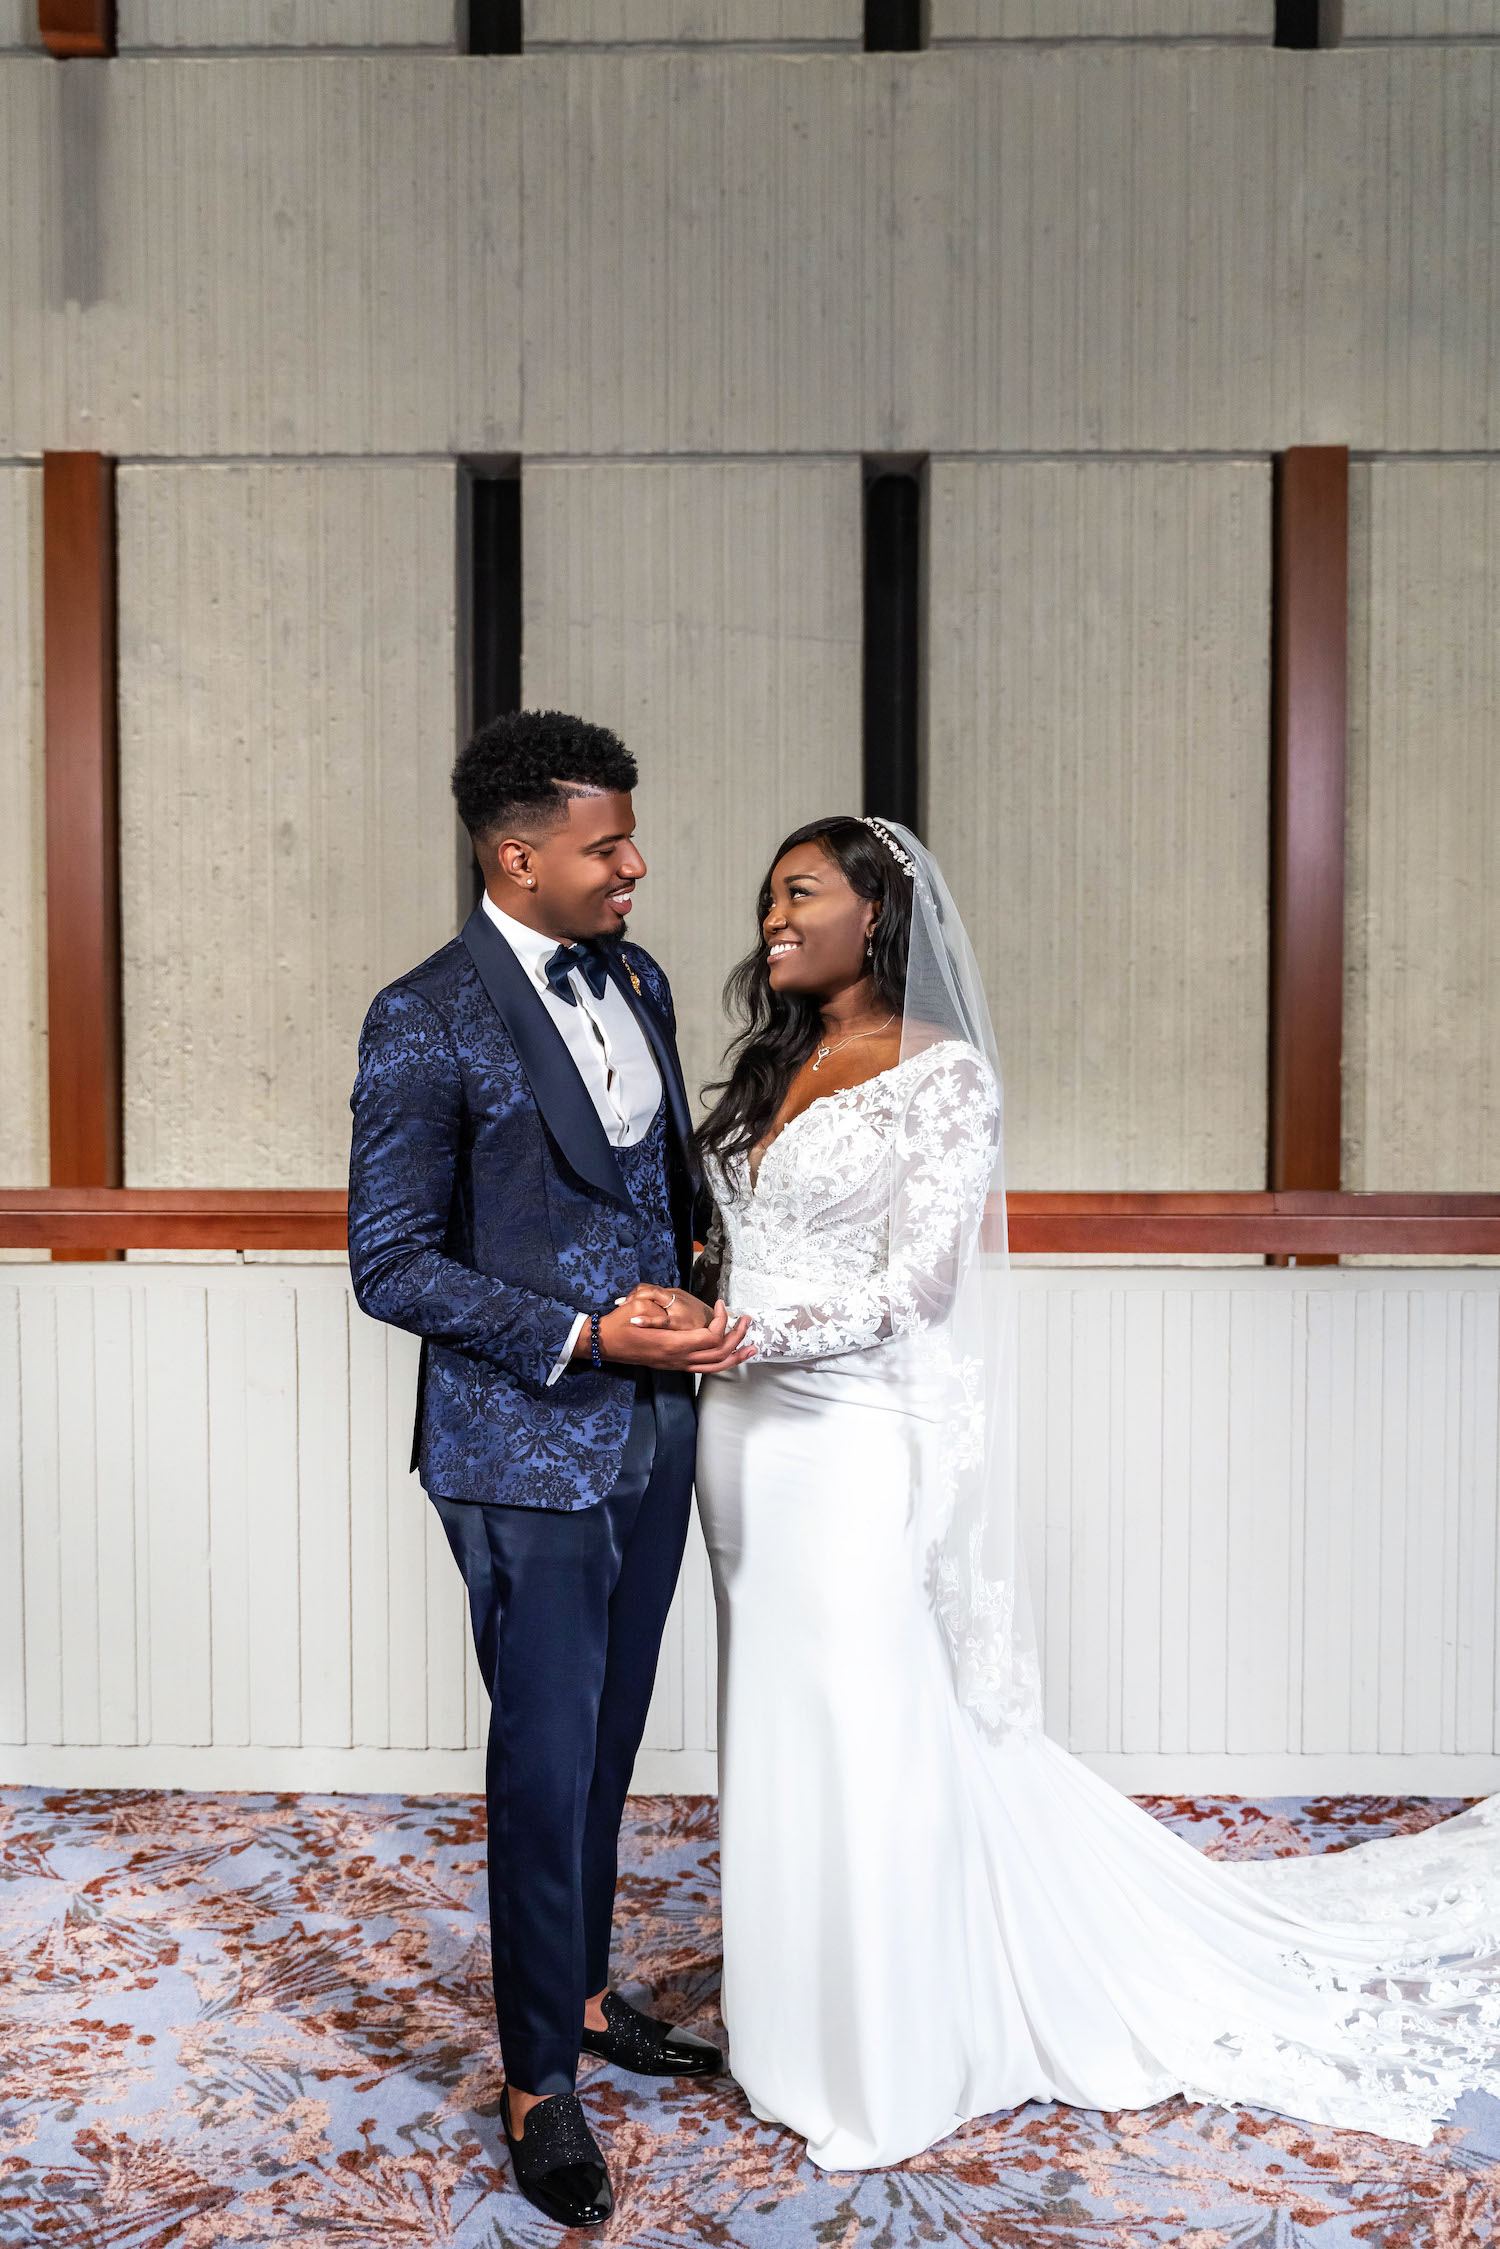 Married at First Sight Season 12 Chris Paige